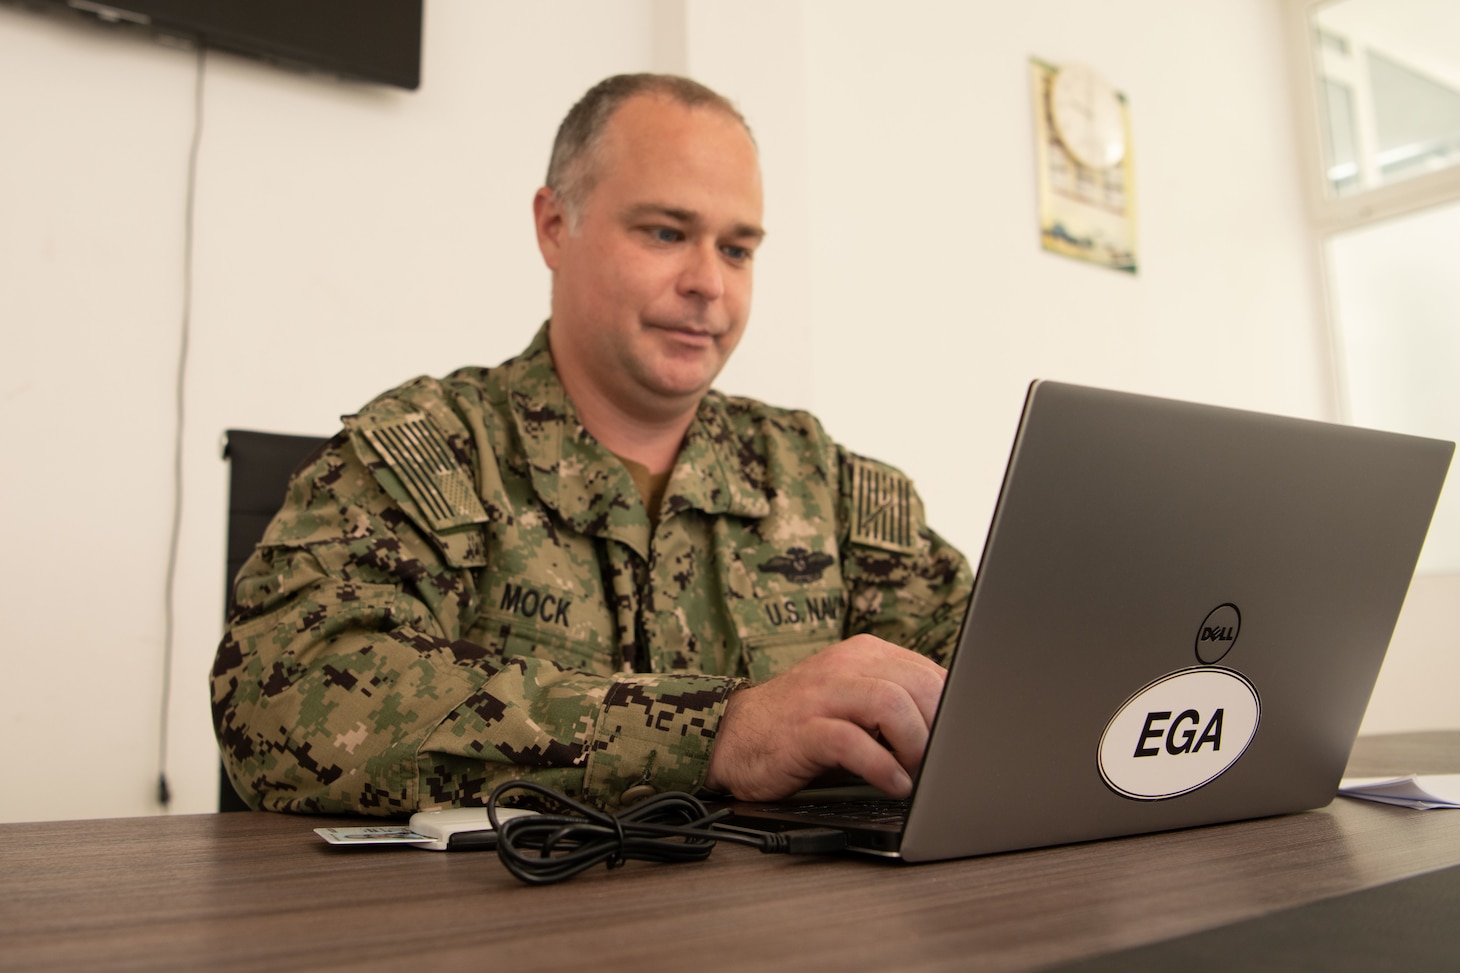 Lt. Jeremy Mock, a supply corps officer for NR CNE-CNA-C6F MPP DET 205, runs on-ground logistics efforts during exercise Phoenix Express 2021 hosted by Tunisia from May 17-28, 2021. Phoenix Express, conducted by U.S. Naval Forces Africa, is an at-sea maritime exercise designed to improve cooperation among participating nations in order to increase maritime safety and security in the Mediterranean. (U.S. Navy photo by Mass Communication Specialist 2nd Class Daniel Charest)